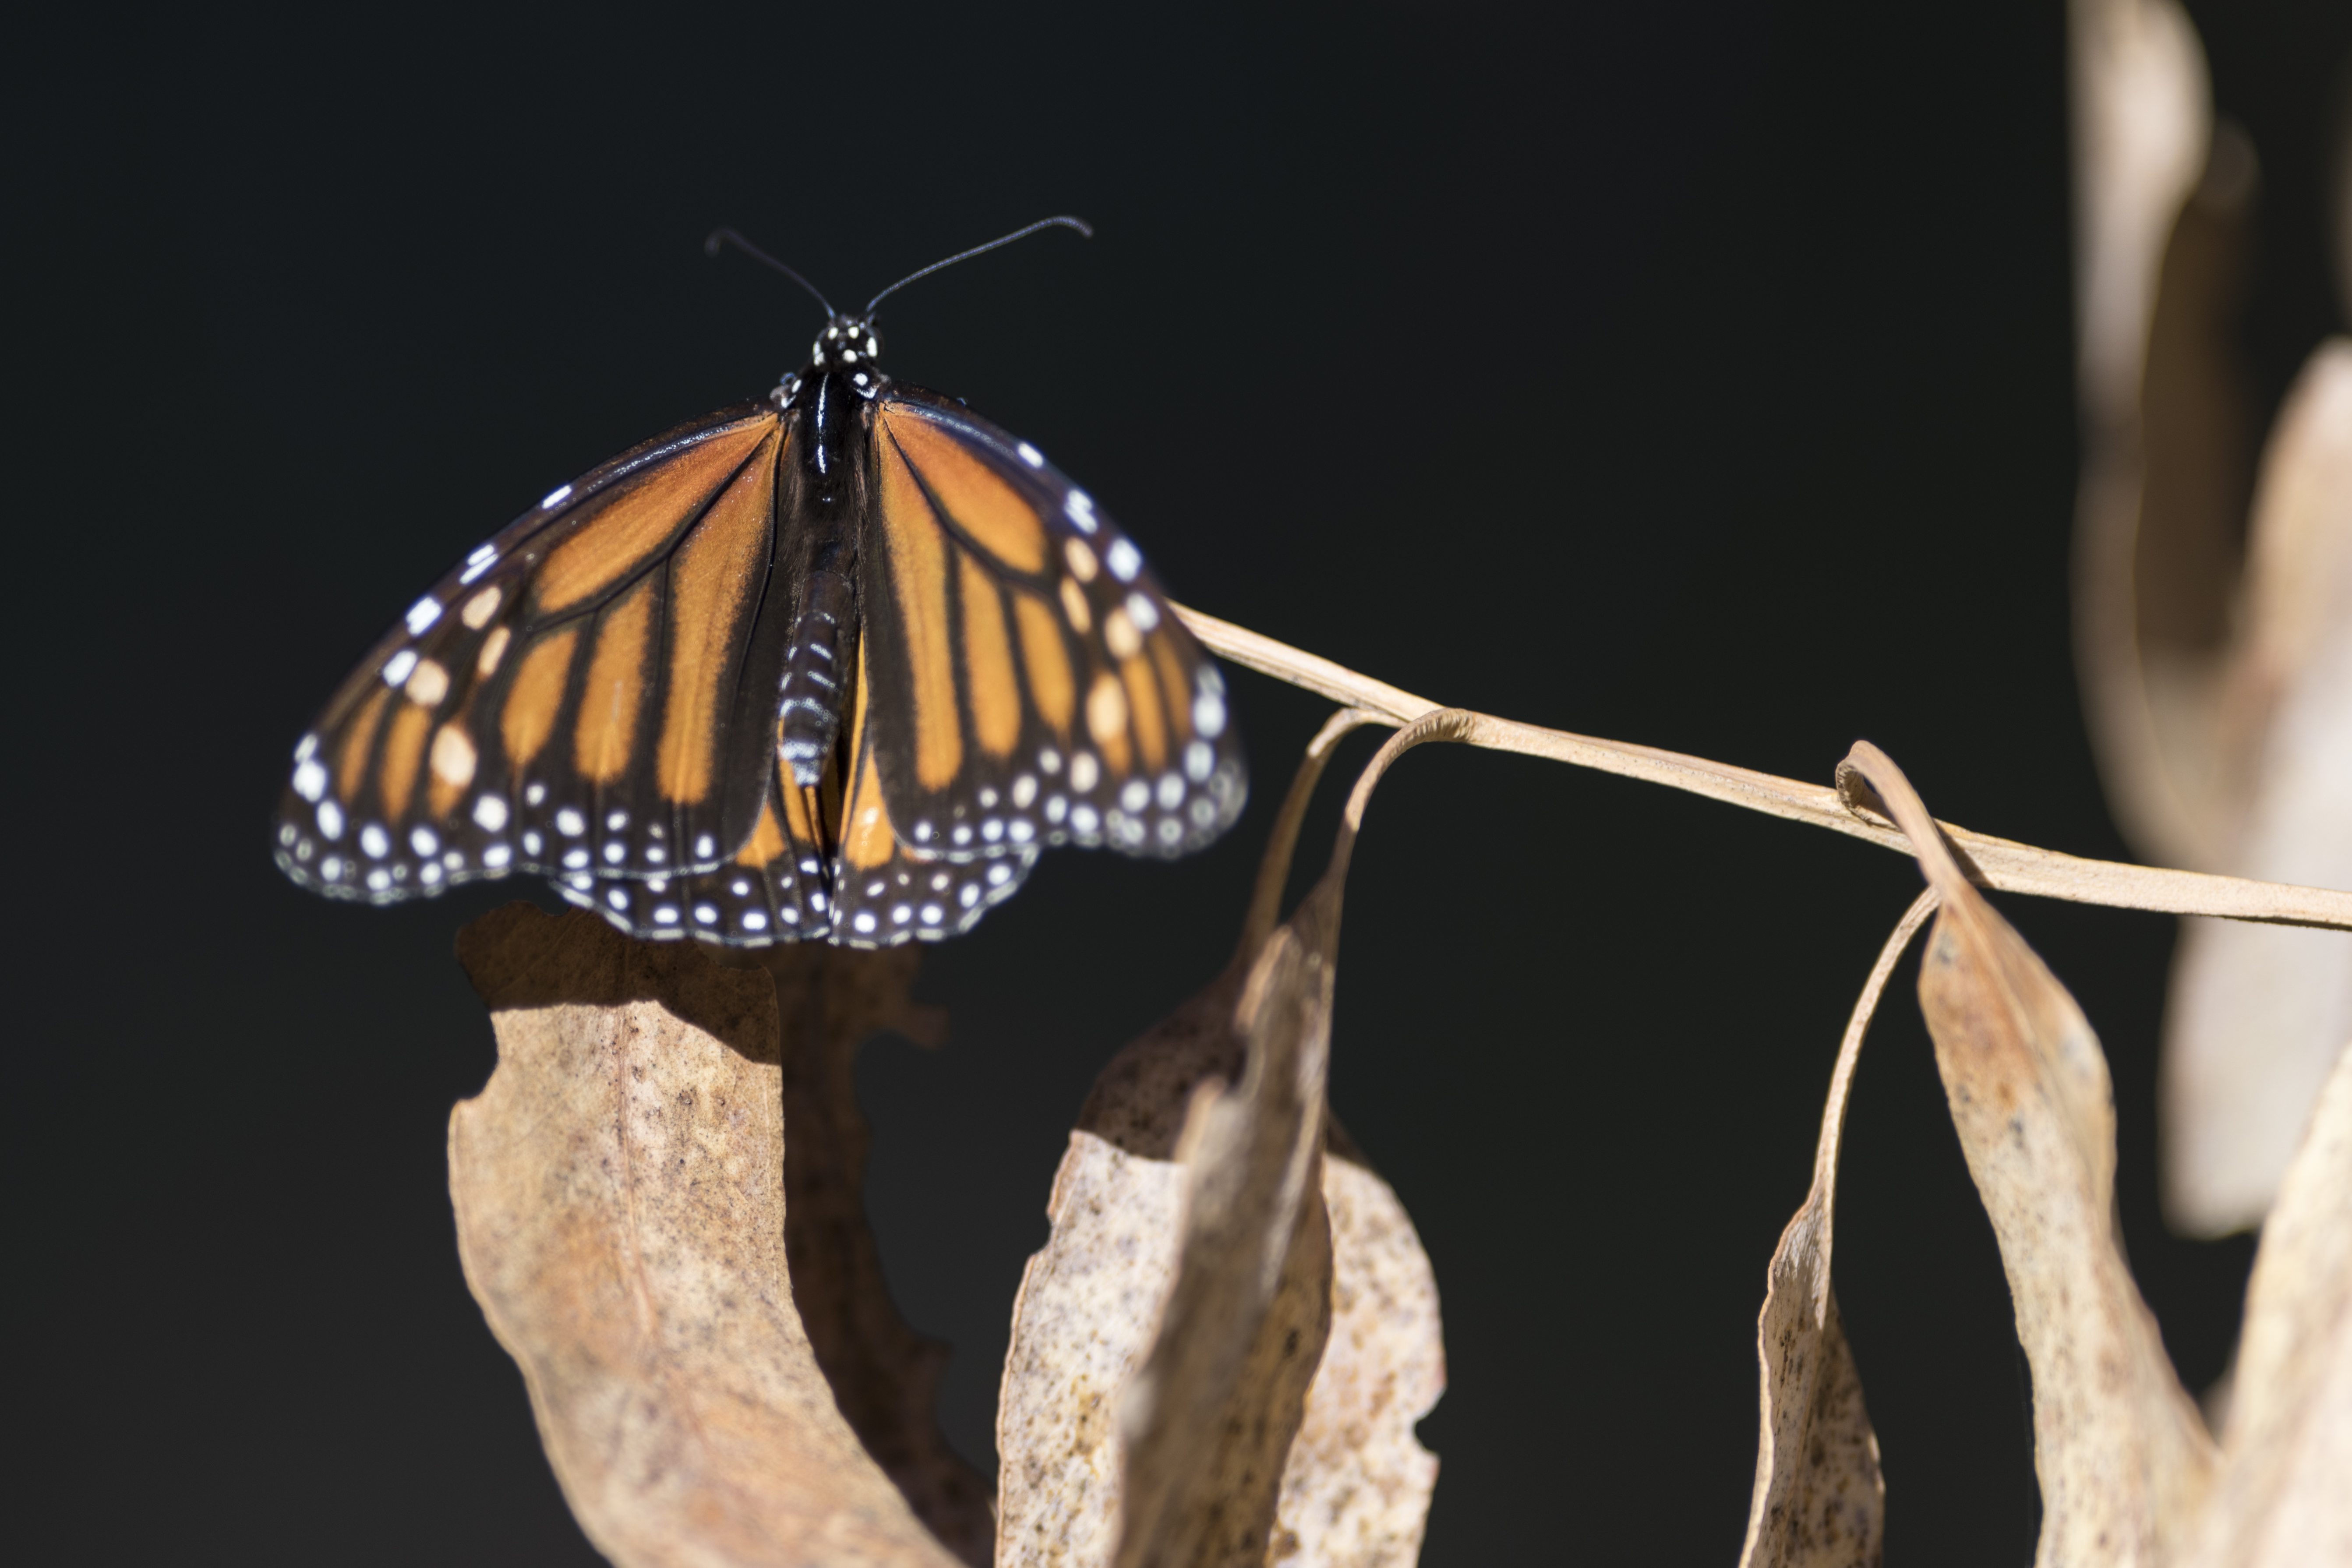 Monarch butterfly migration moves south, but numbers may be